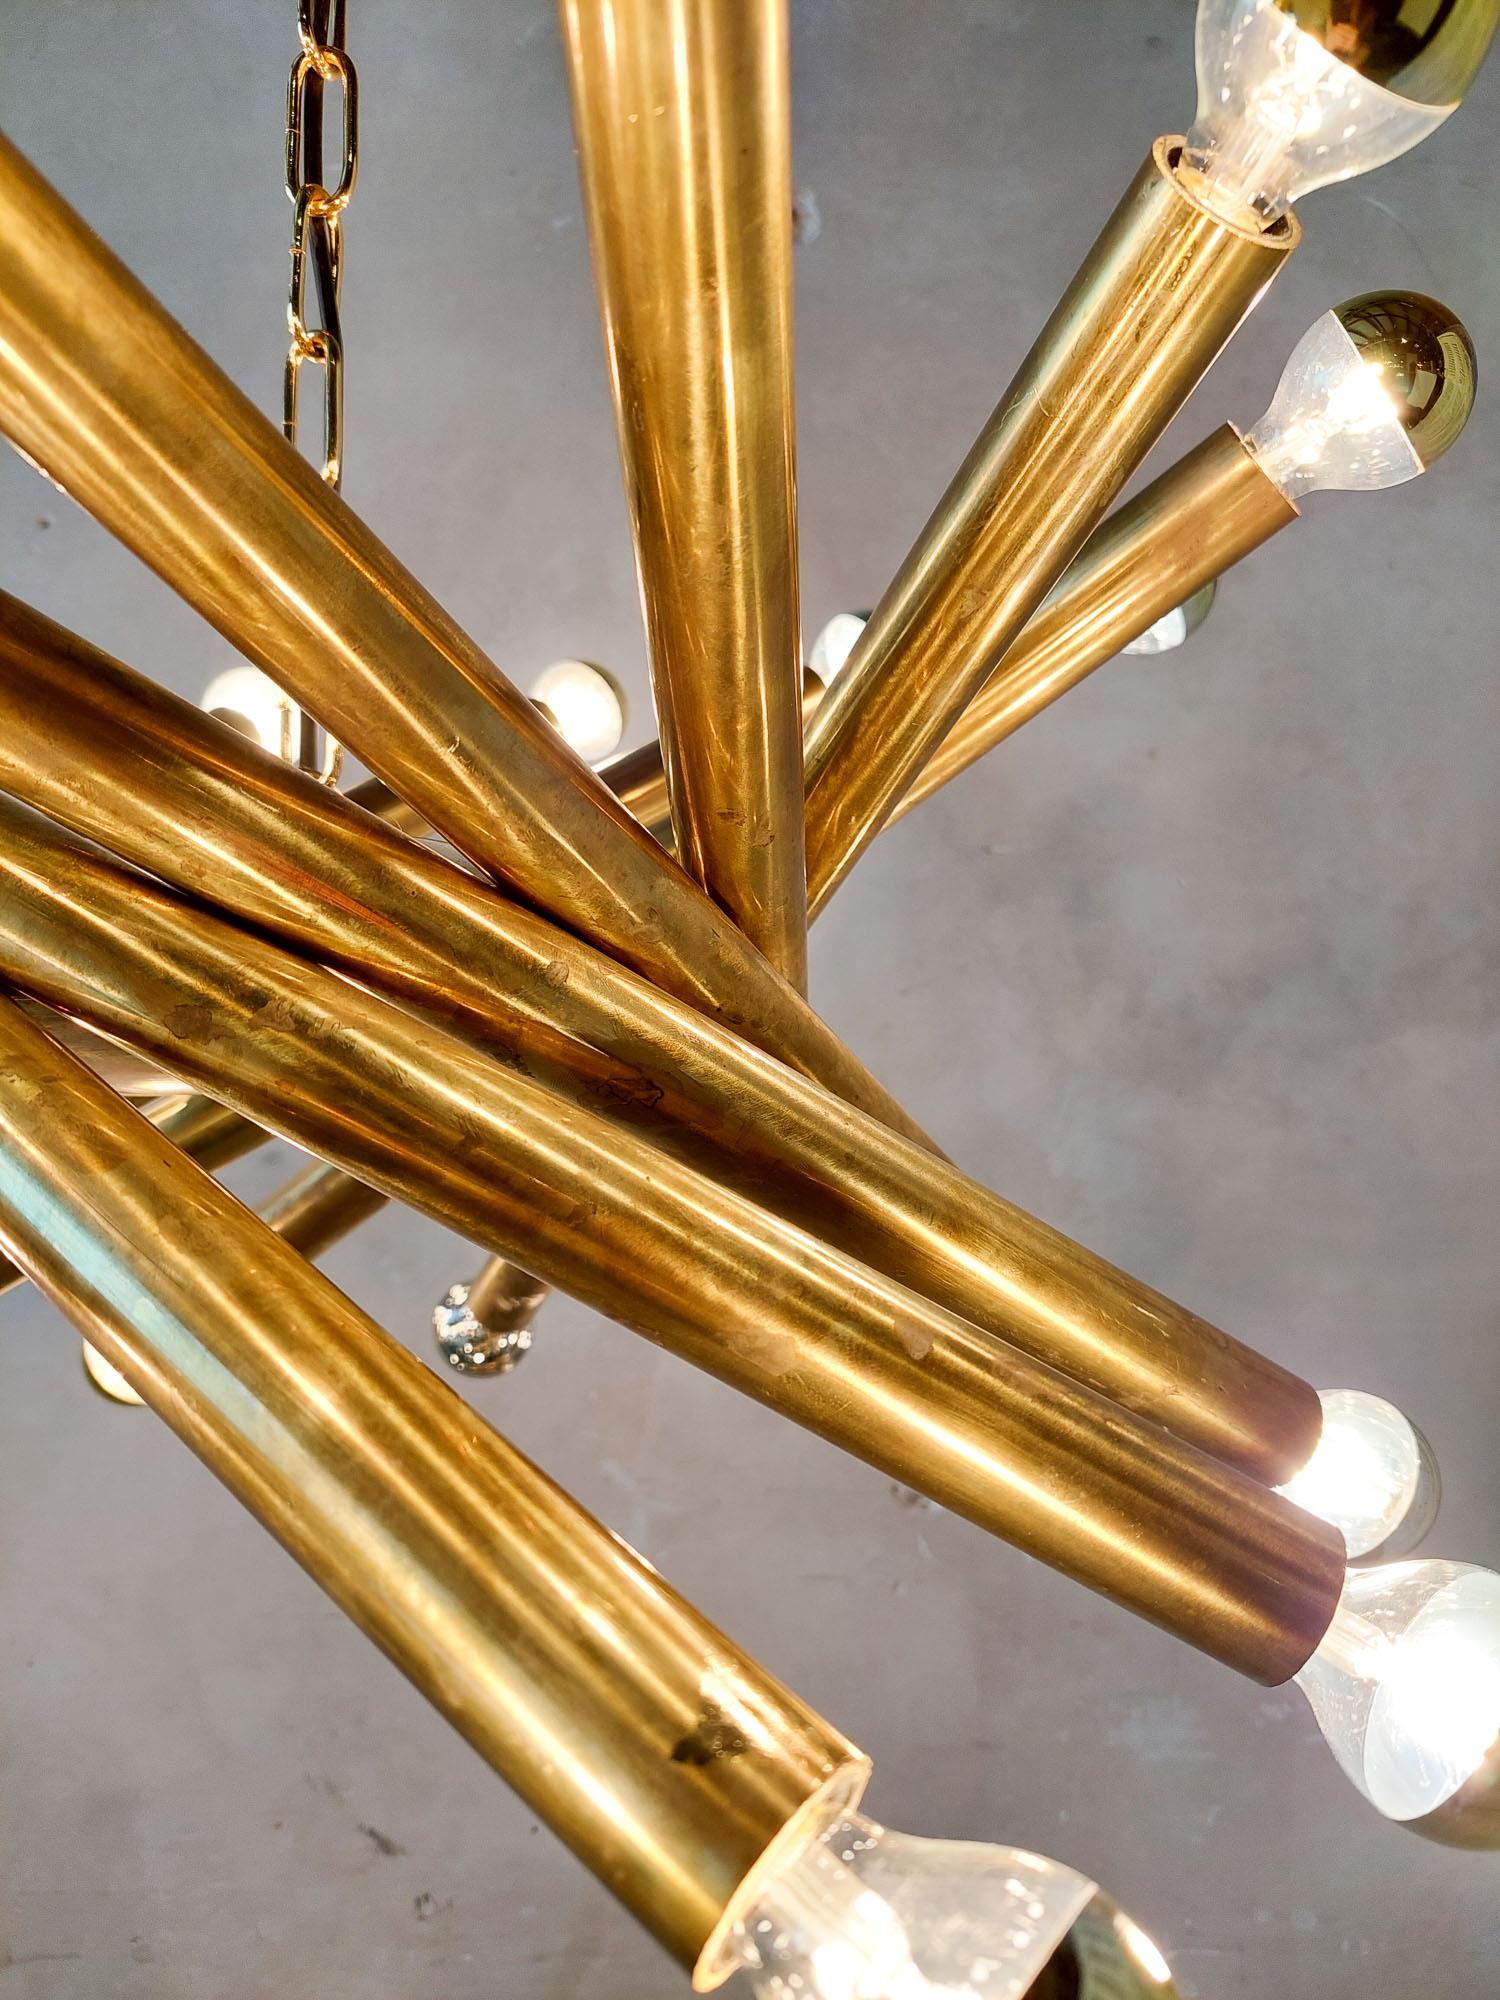 Pair of Midcentury Italian Brass Pendant Lamps by Stilnovo from the 1950s For Sale 5